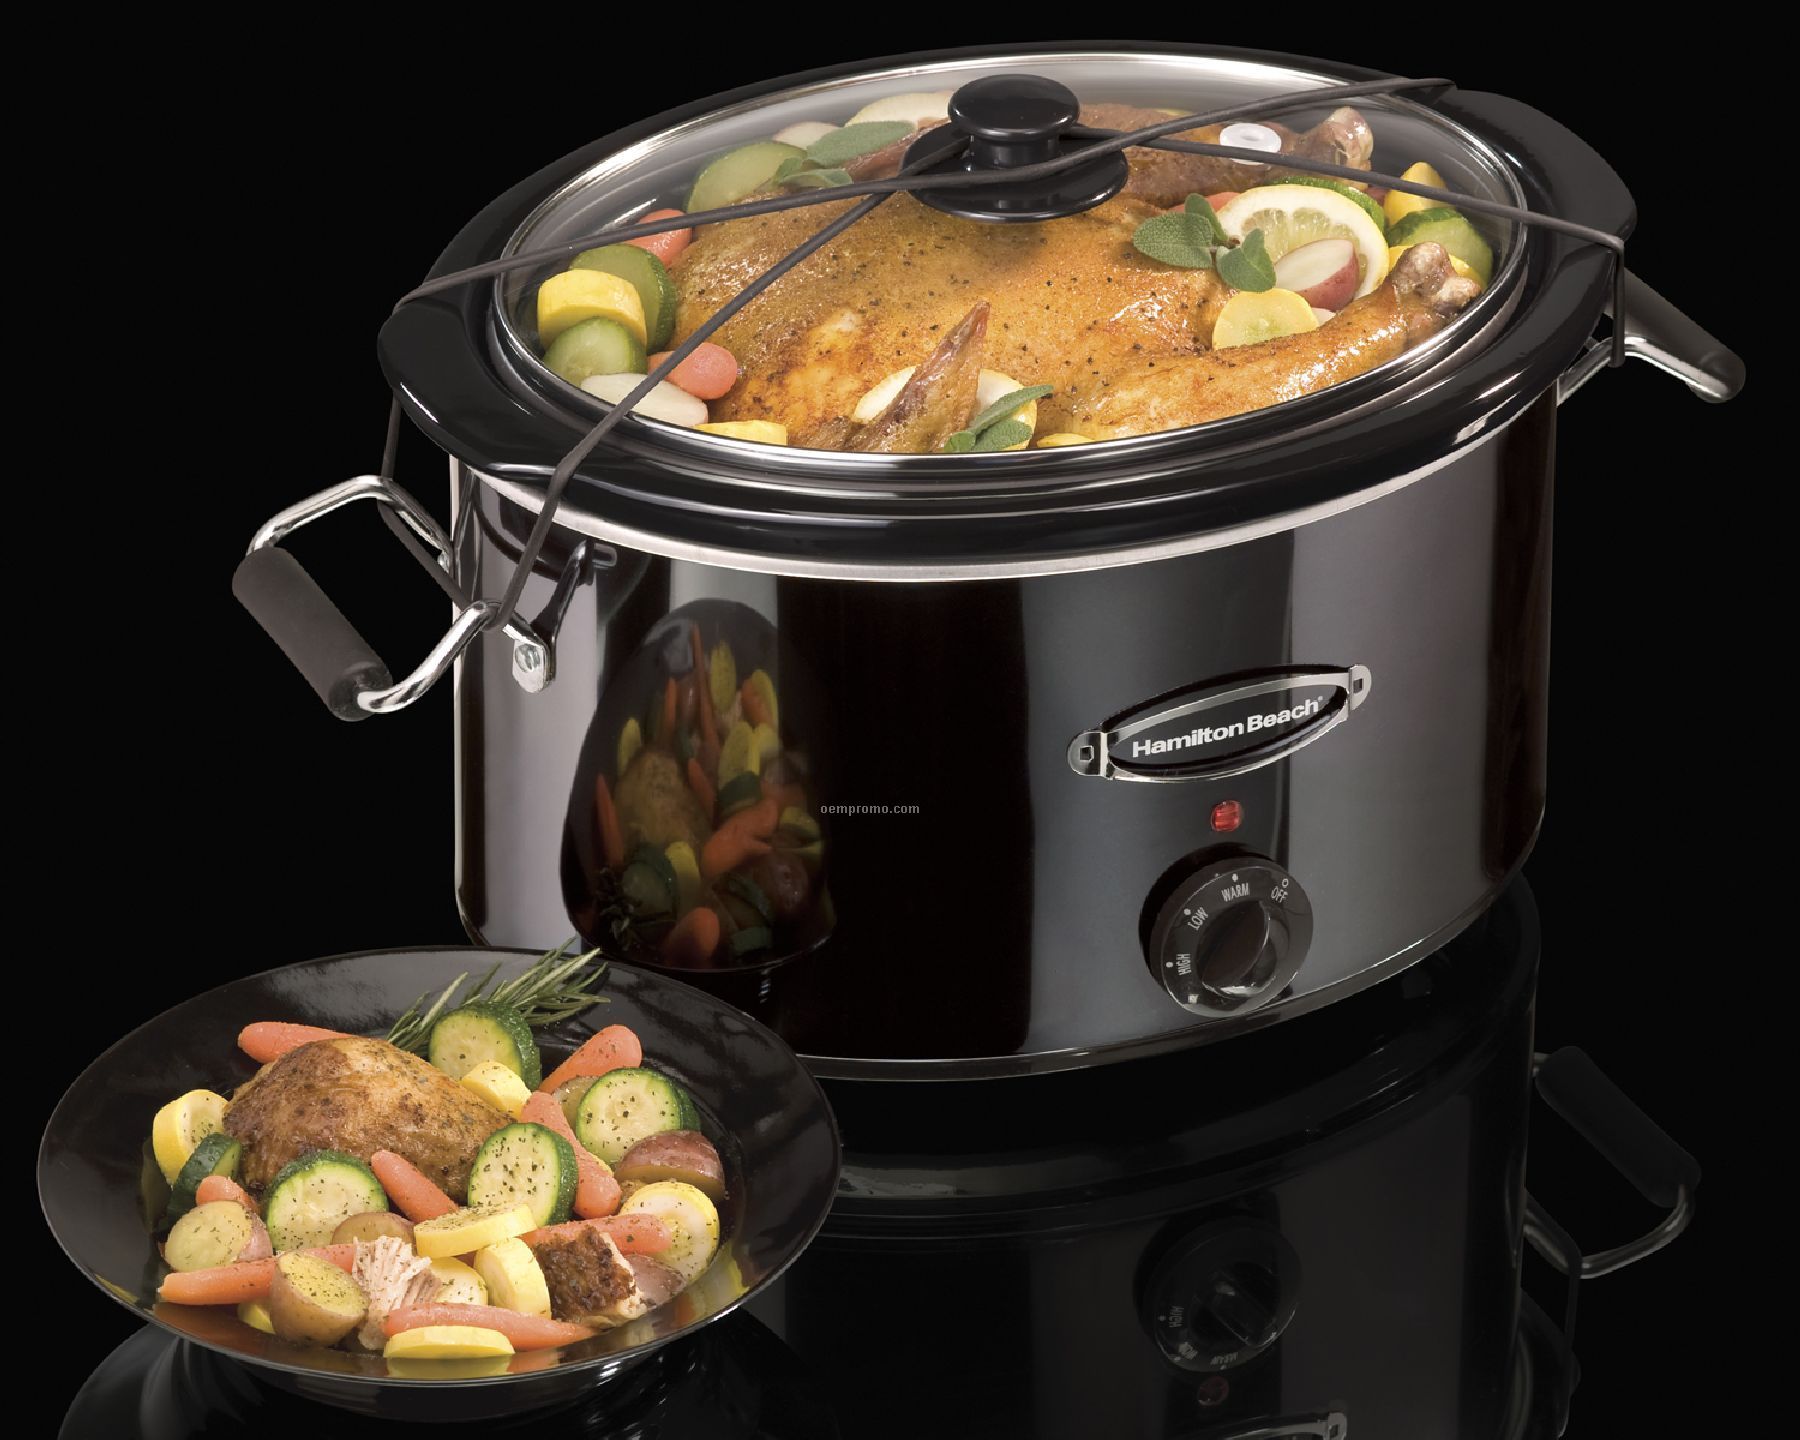 Hamilton Beach - Slow Cookers - 7 Qt Oval Black Ice Slow Ckr